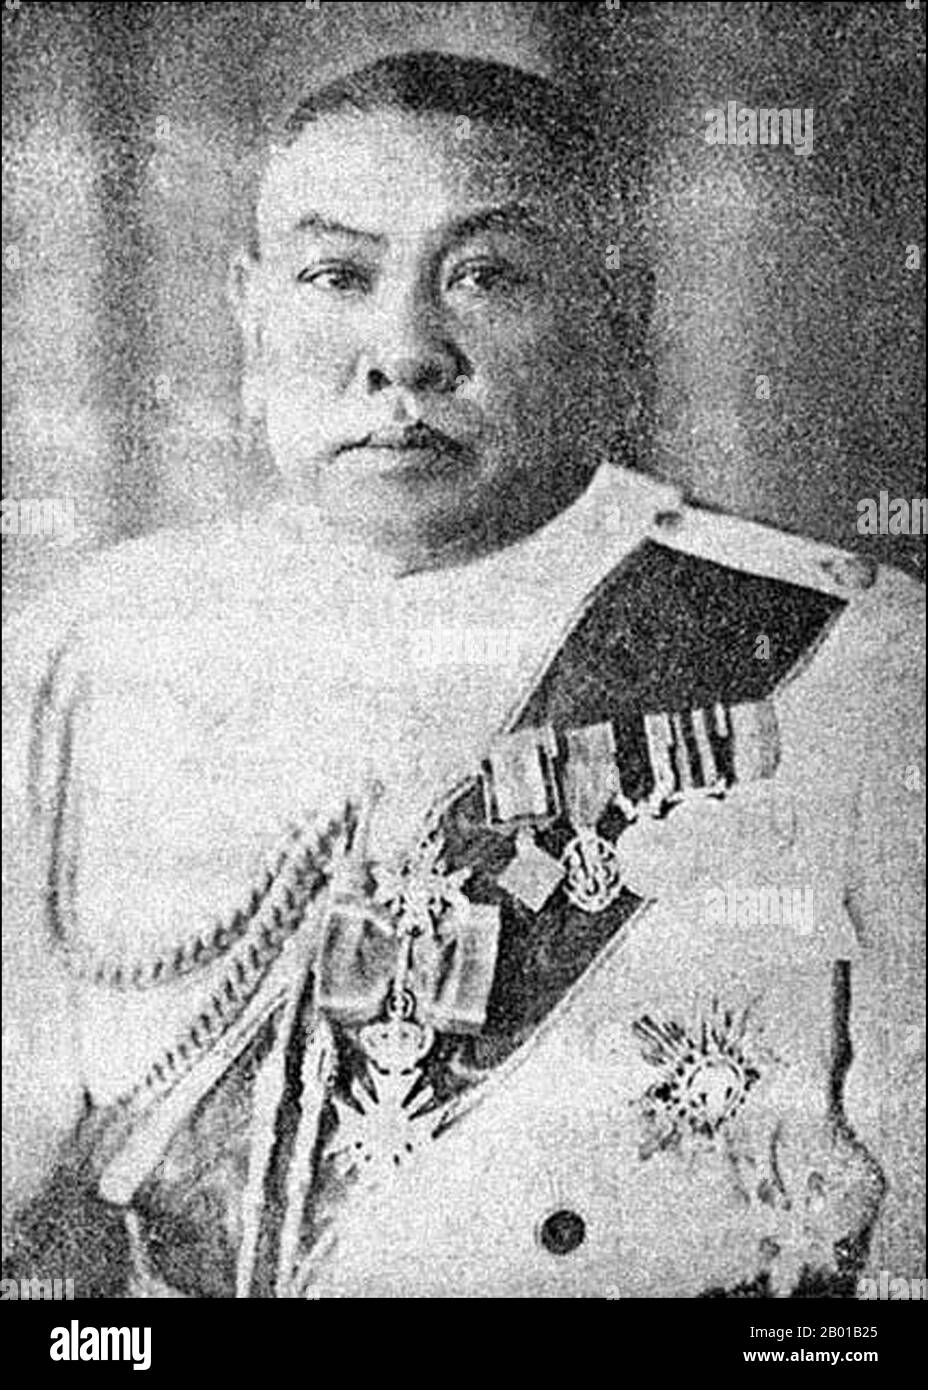 Thailand: General Phot Phahonyothin (29 March 1887 - 14 February 1947), Prime Minister of Thailand (r. 1933-1938), c. 1930s.  General Phraya Phahon Phonphayuhasen, born as Phot Phahonyothin, was a Thai military leader and politician. Part of a group of conspirators known as the 'Four Musketeers', he was a leader in the Khana Ratsadon ('People's Party') that instigated the revolution of 1932 to end Siam's absolute monarchy and establish a constitutional state.   He became the Second Prime Minister of Siam in 1933 after ousting his predecessor in a coup d'état. He retired in 1938. Stock Photo